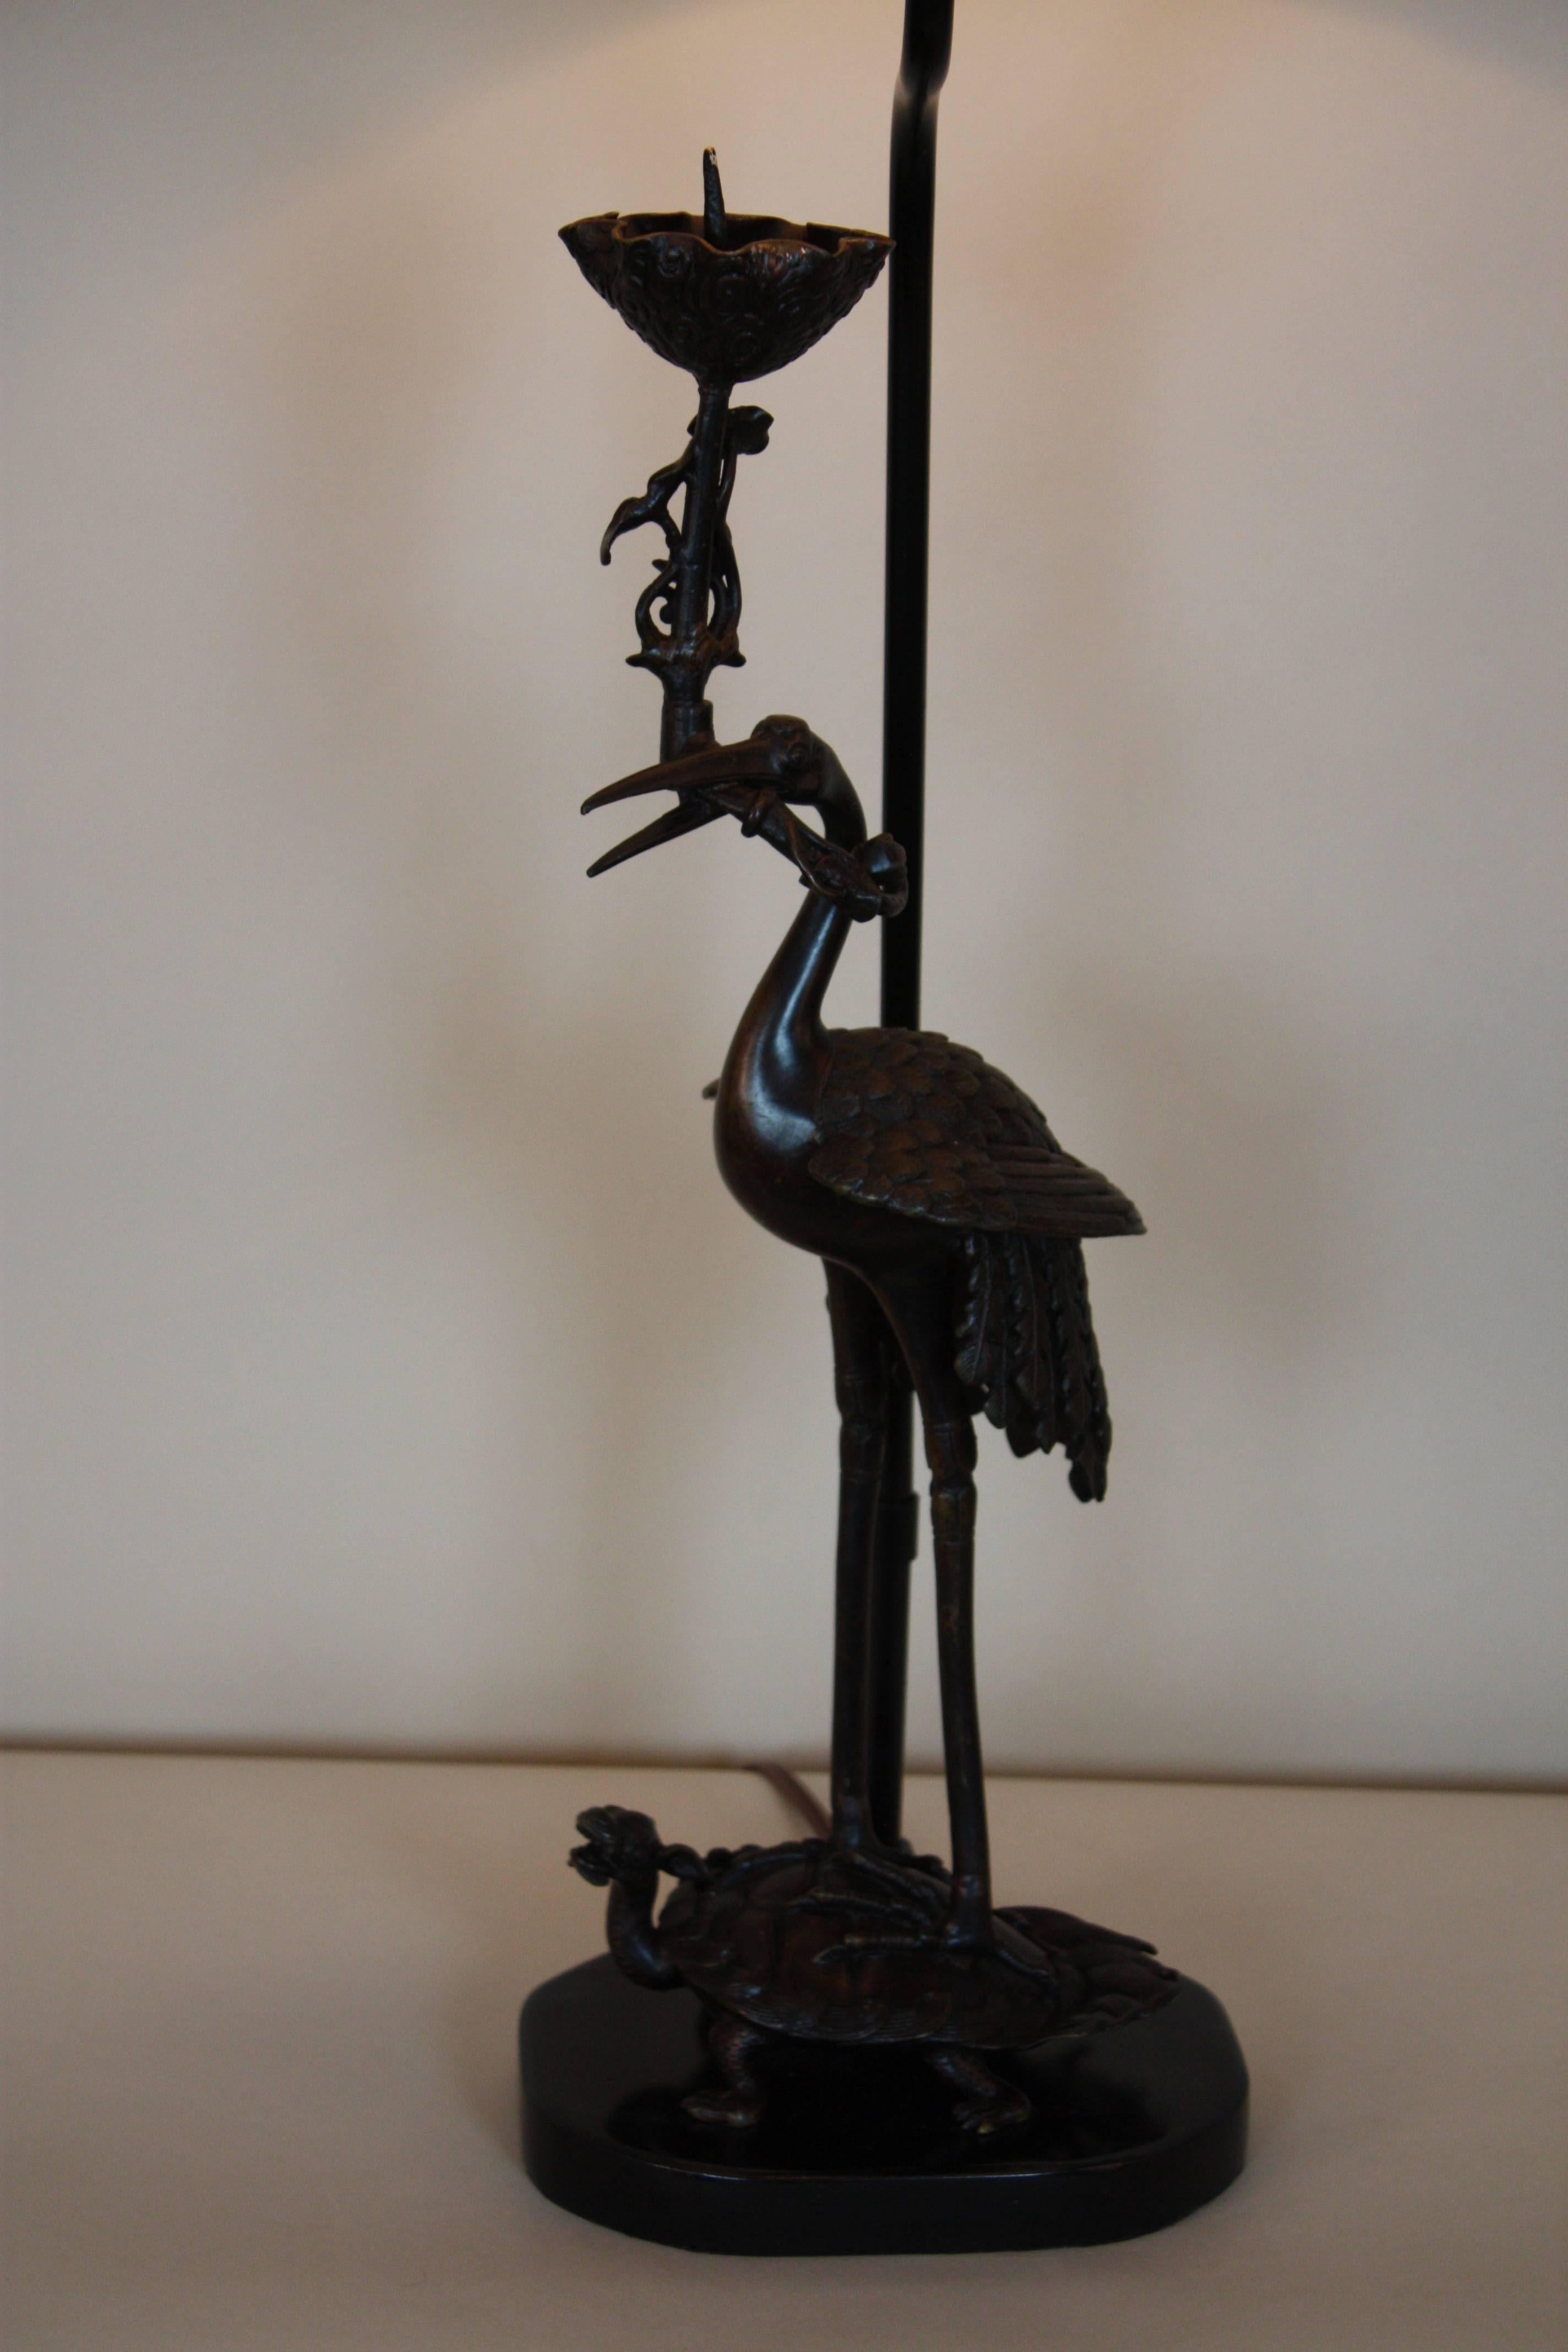 Elegant 19th century Chinese bronze candlestick. The crane on the back of the tortoise (symbol of longevity) that has been customized as a table lamp.
This lamp is fitted with hardback linen shade.